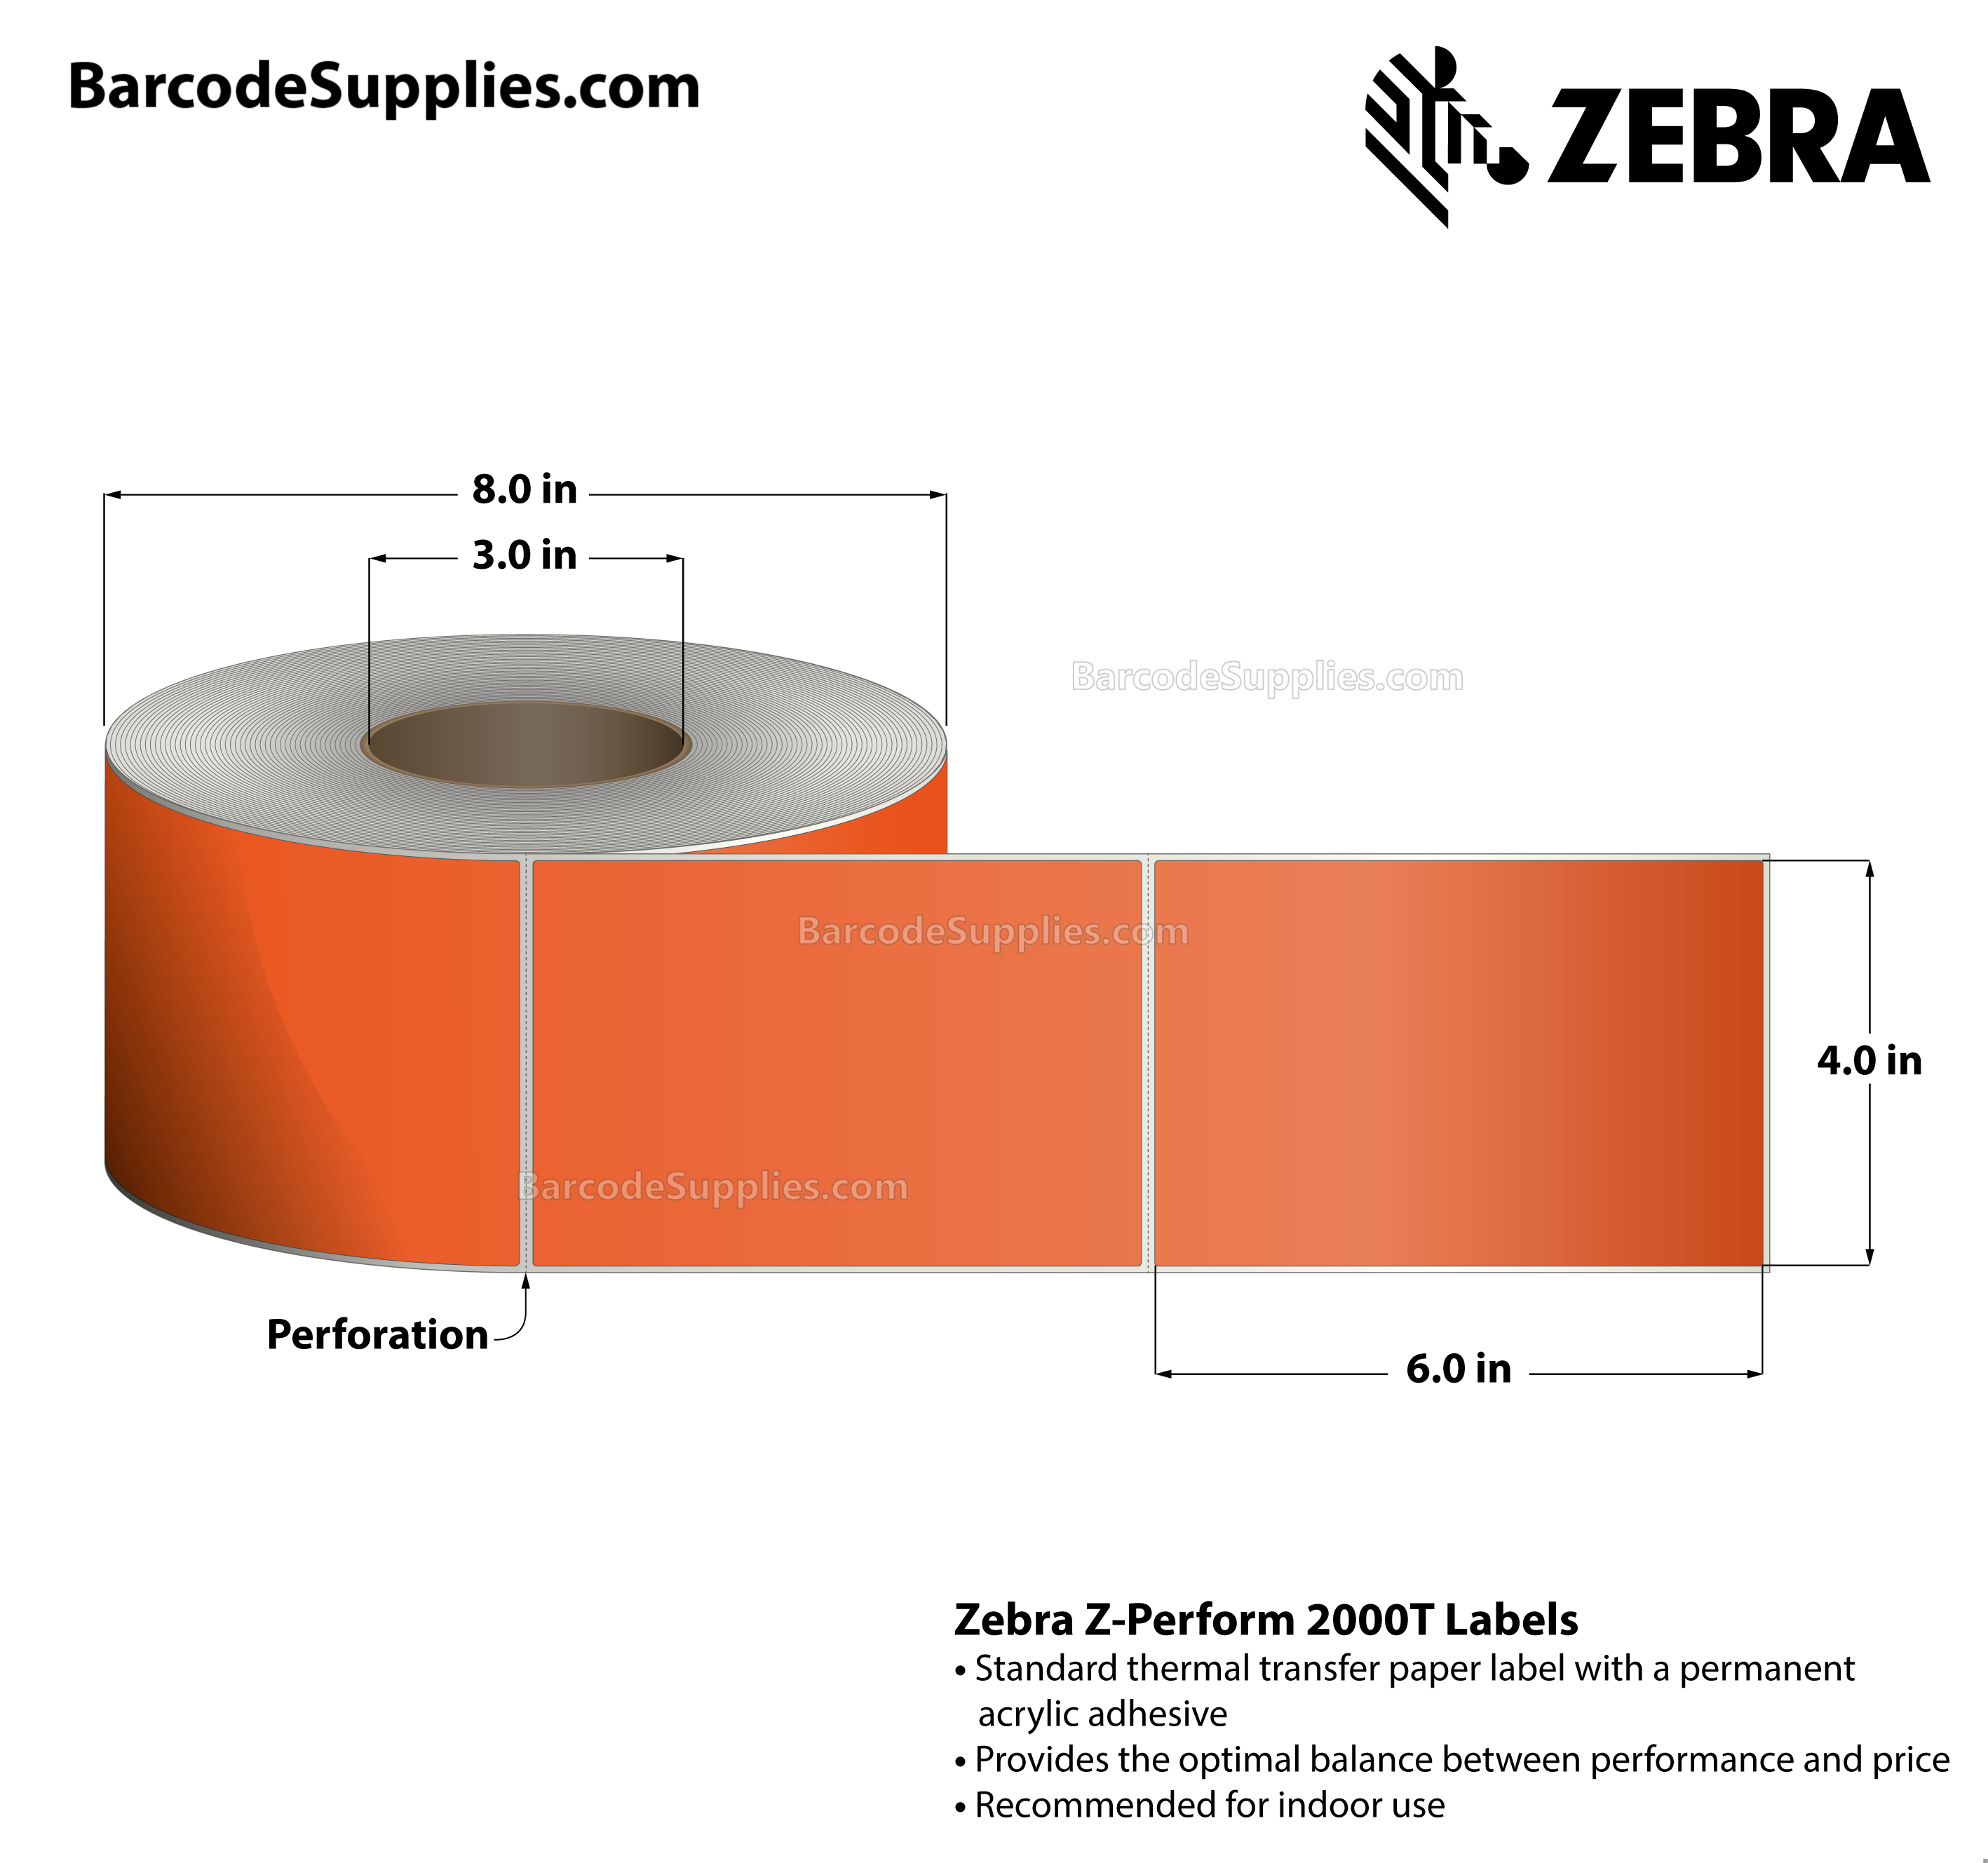 4 x 6 Thermal Transfer Orange - PMS 021 Z-Perform 2000T Floodcoated (Orange) Labels With Permanent Adhesive - Perforated - 1000 Labels Per Roll - Carton Of 4 Rolls - 4000 Labels Total - MPN: 10006208-4